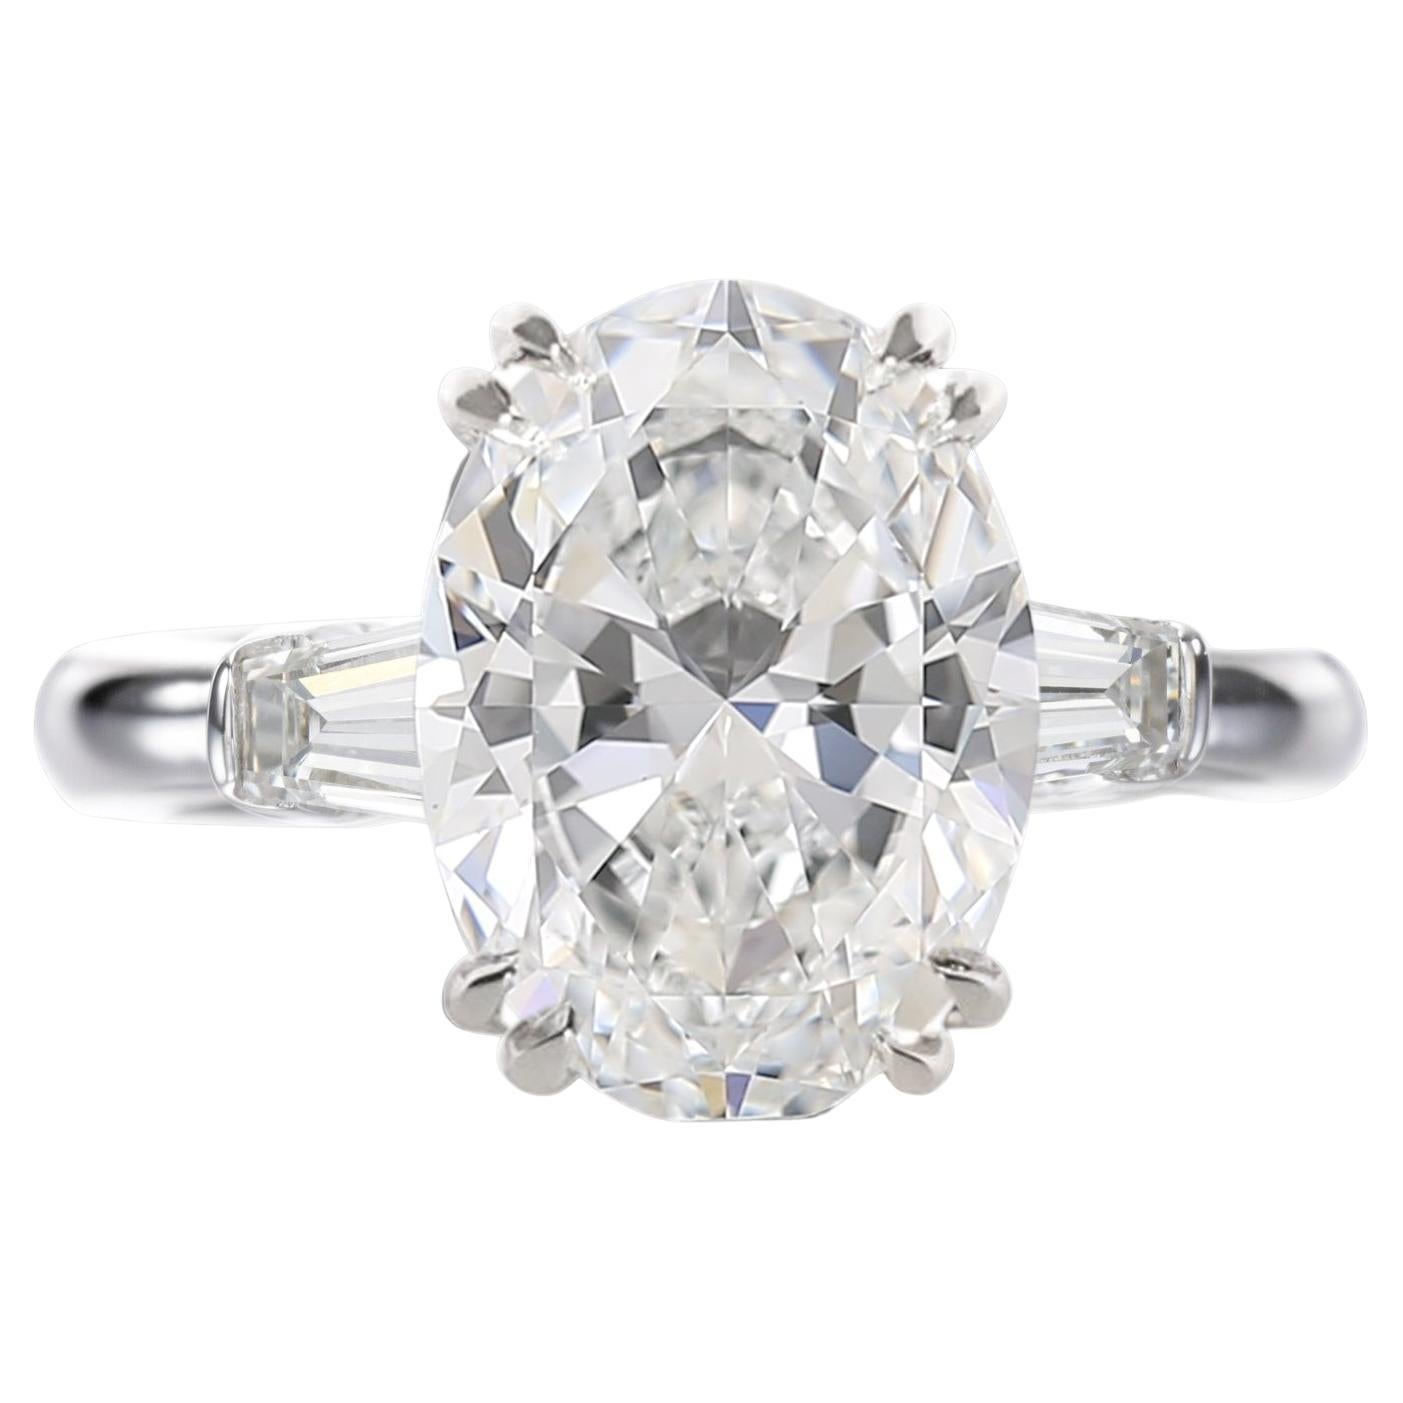 En vente :  2.01 Ct GIA Certified Oval Brilliant Cut Diamond with tapered baguette